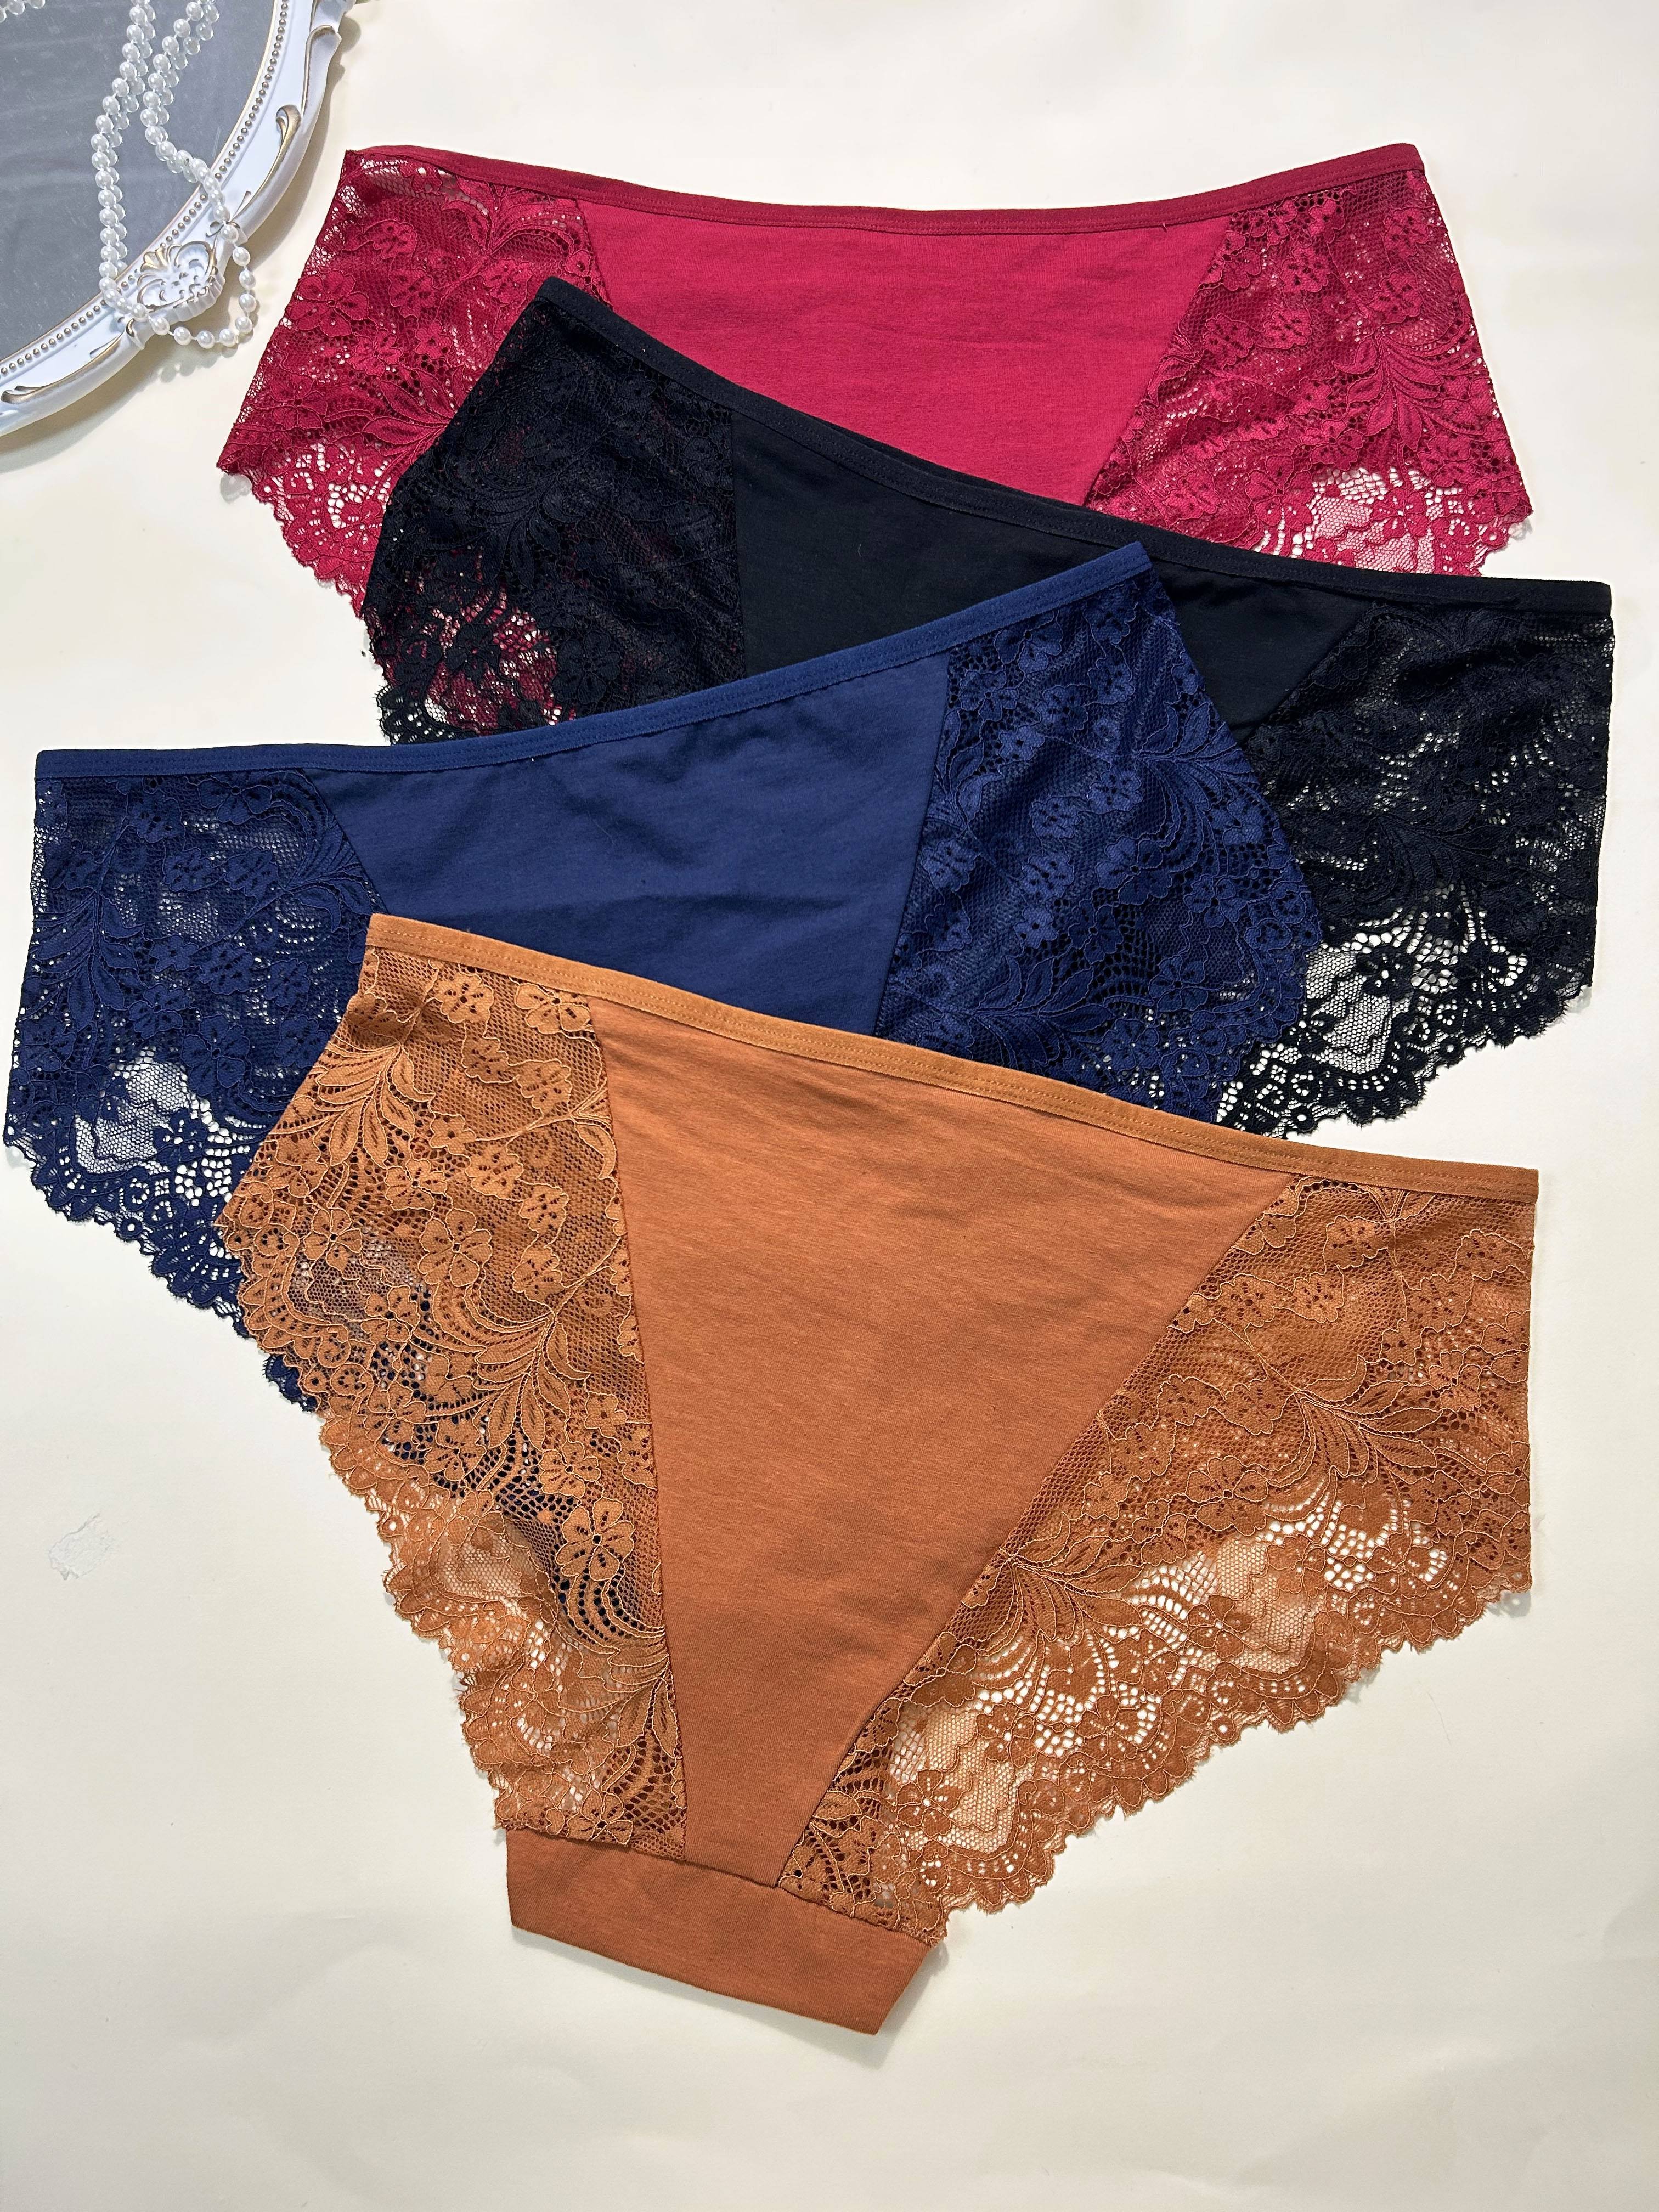 Plus Size Hipster Panty Sexy Plus Size Panties Plus Size Brief